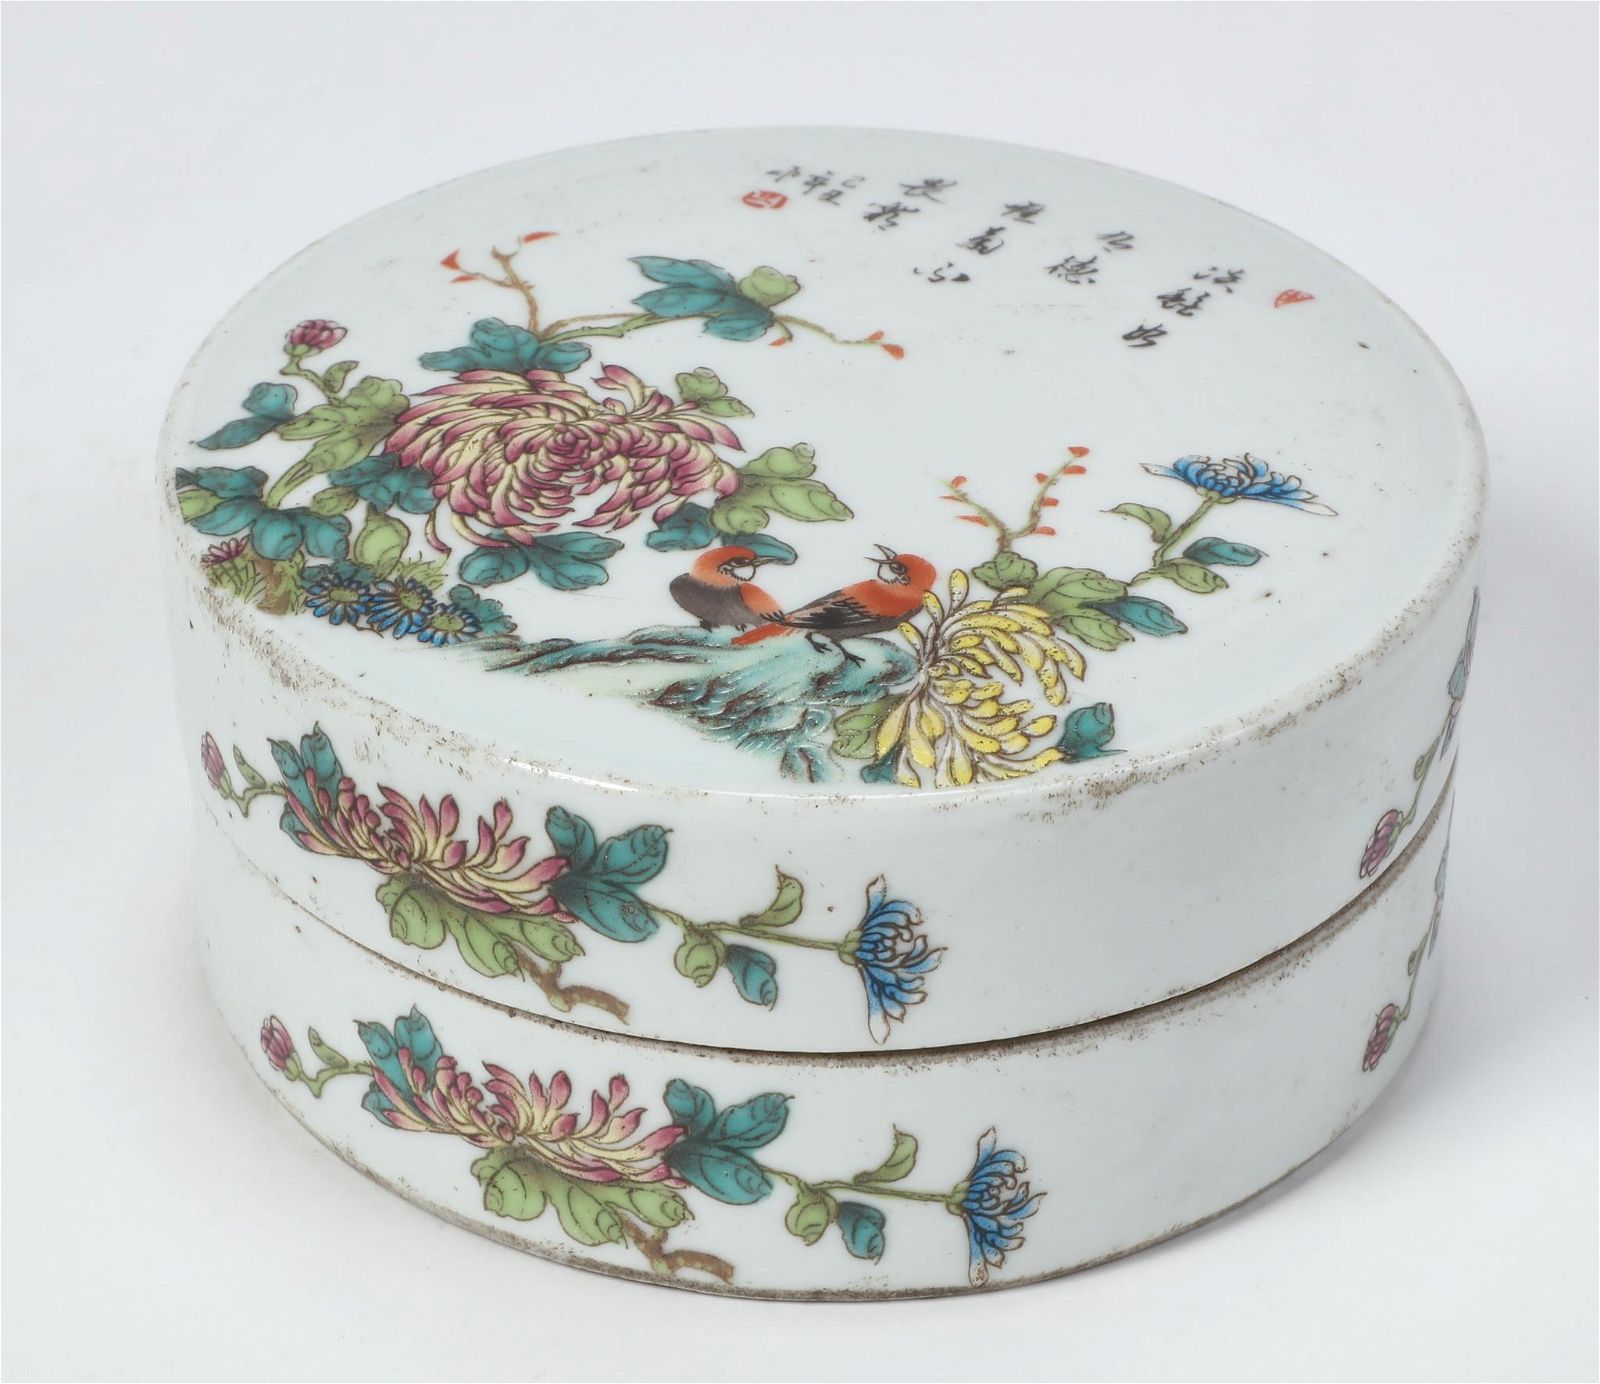 A CHINESE FAMILLE ROSE PORCELAIN